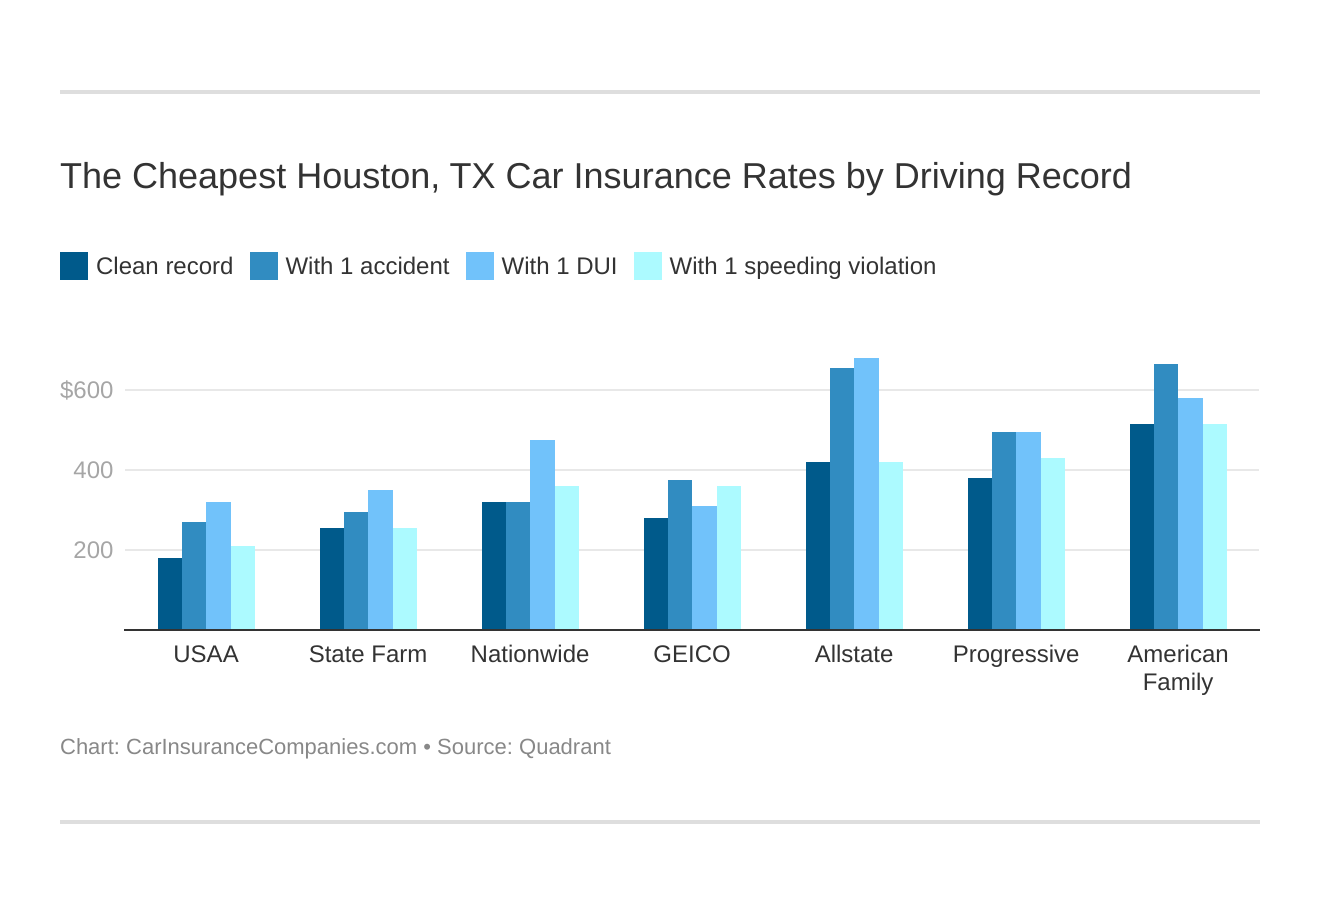 The Cheapest Houston, TX Car Insurance Rates by Driving Record